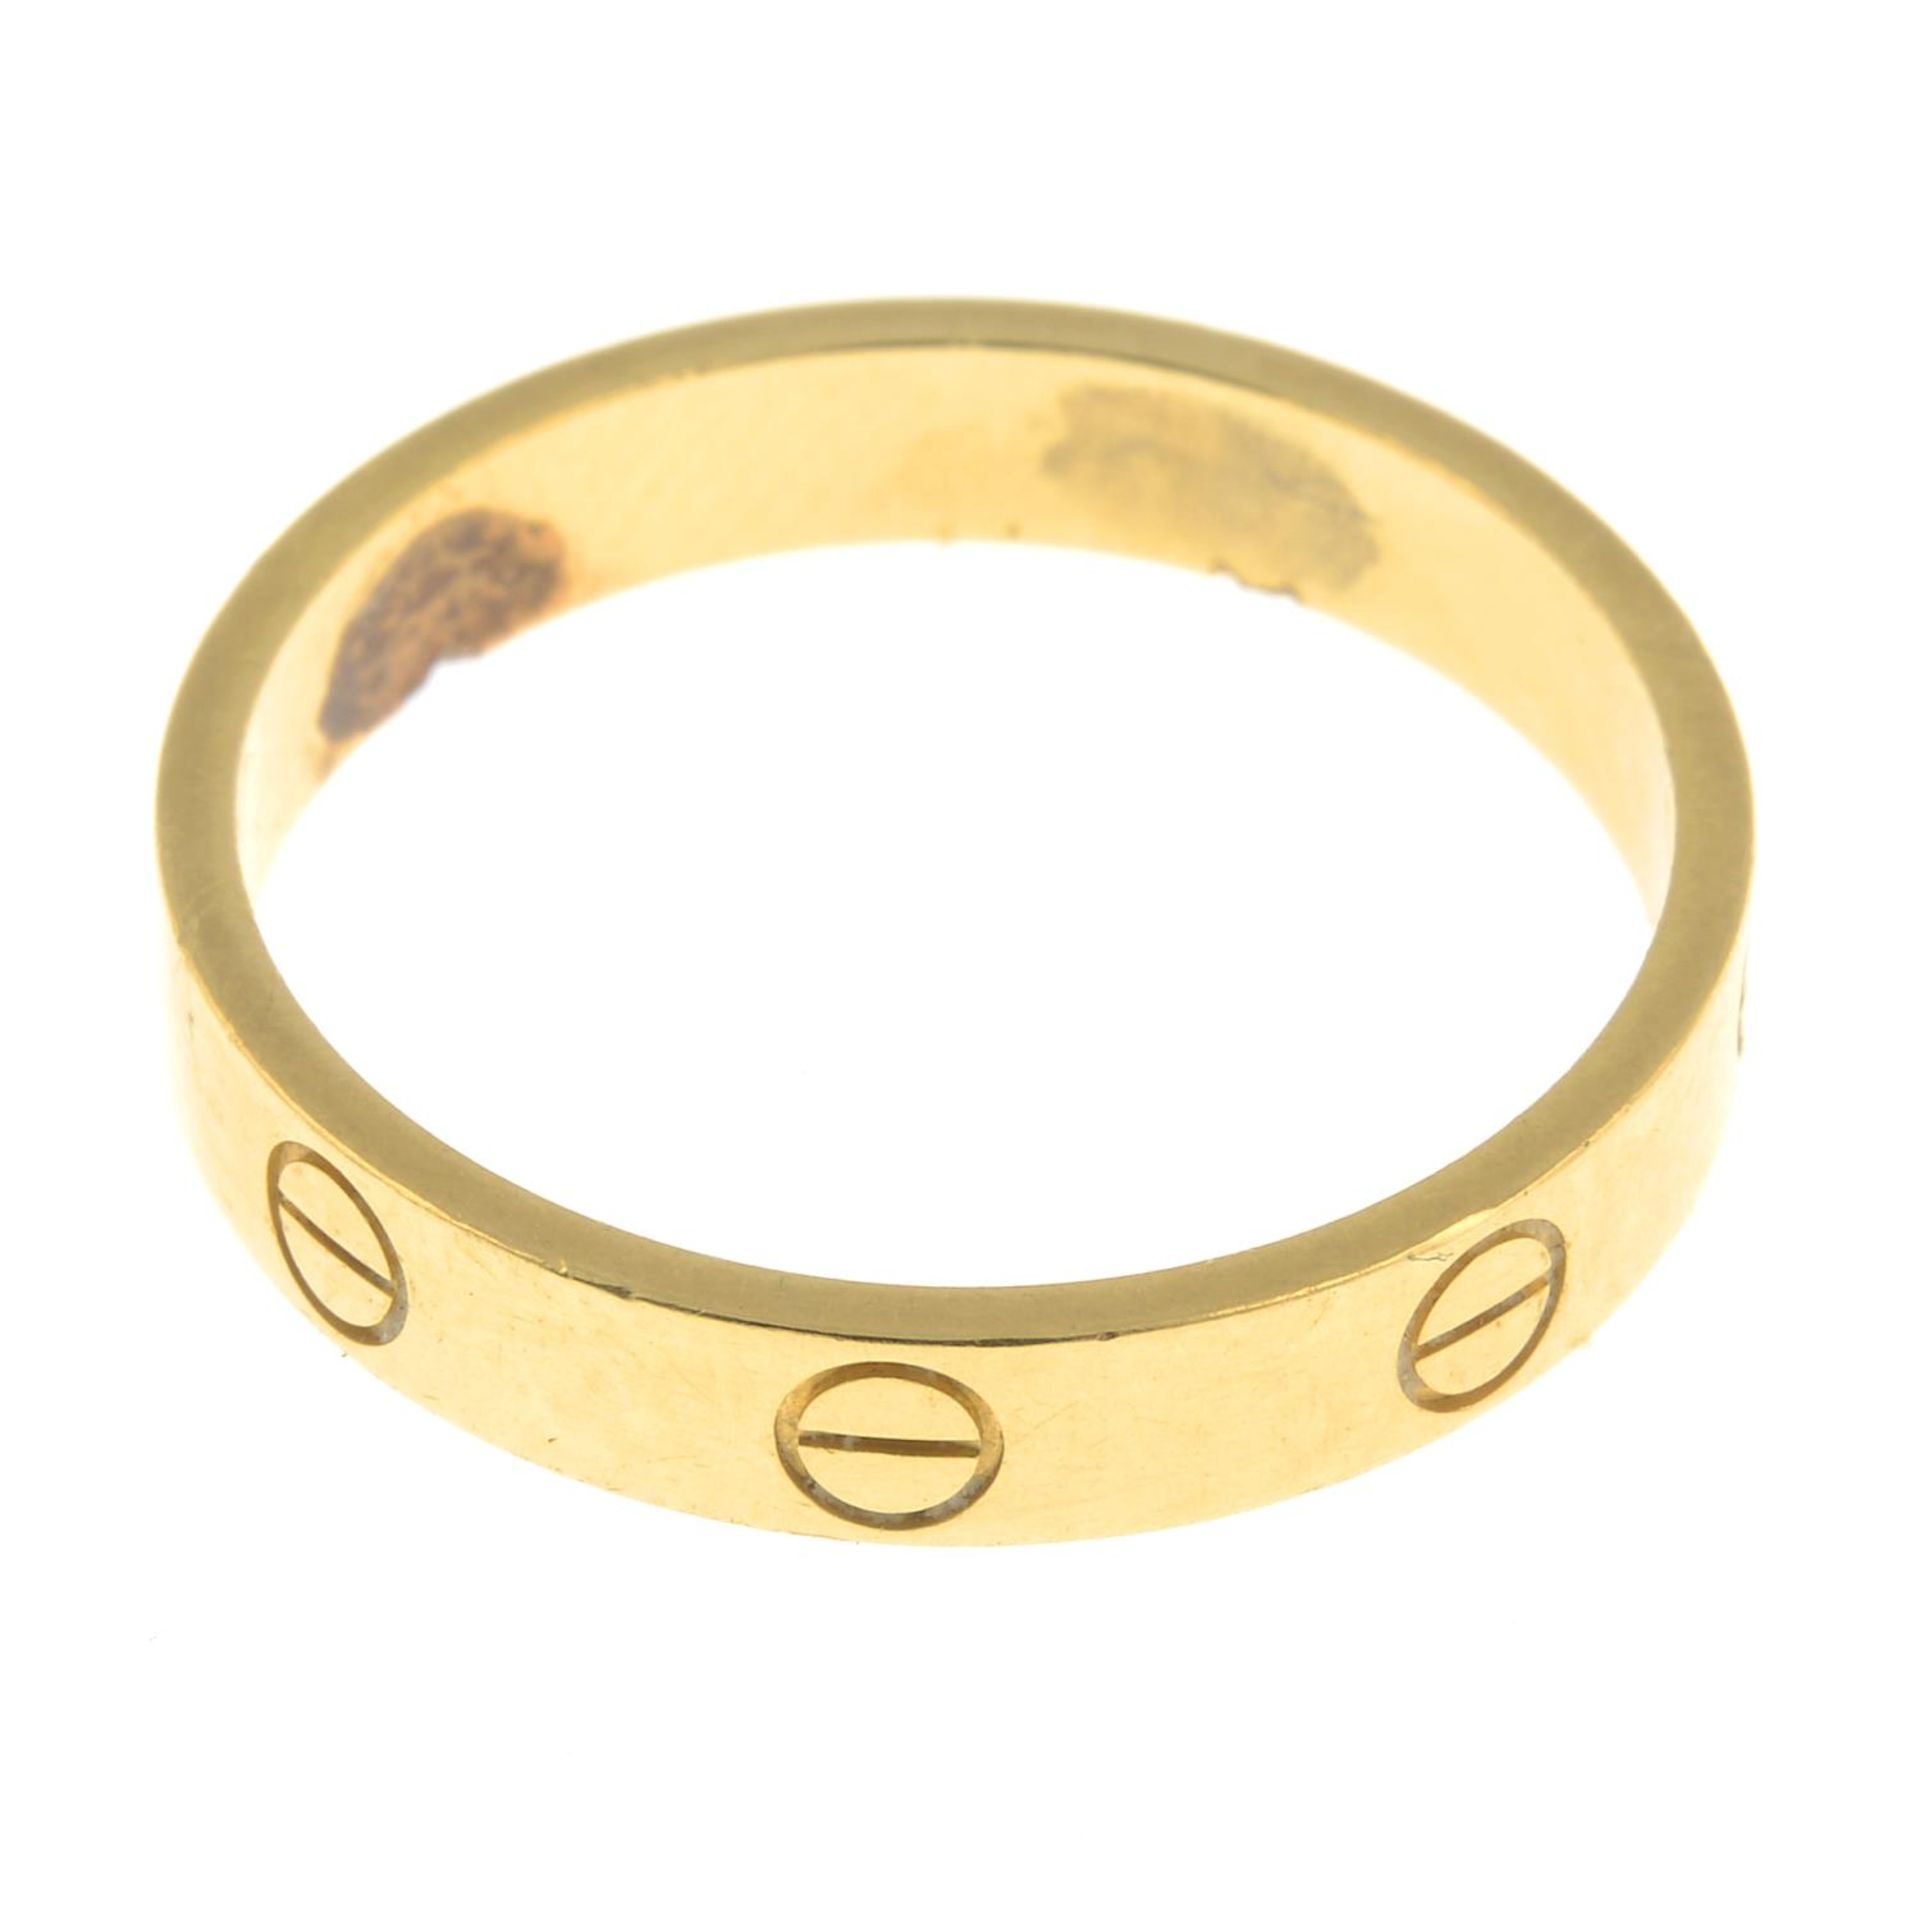 CARTIER - an 18ct gold 'Love' ring. - Image 3 of 3